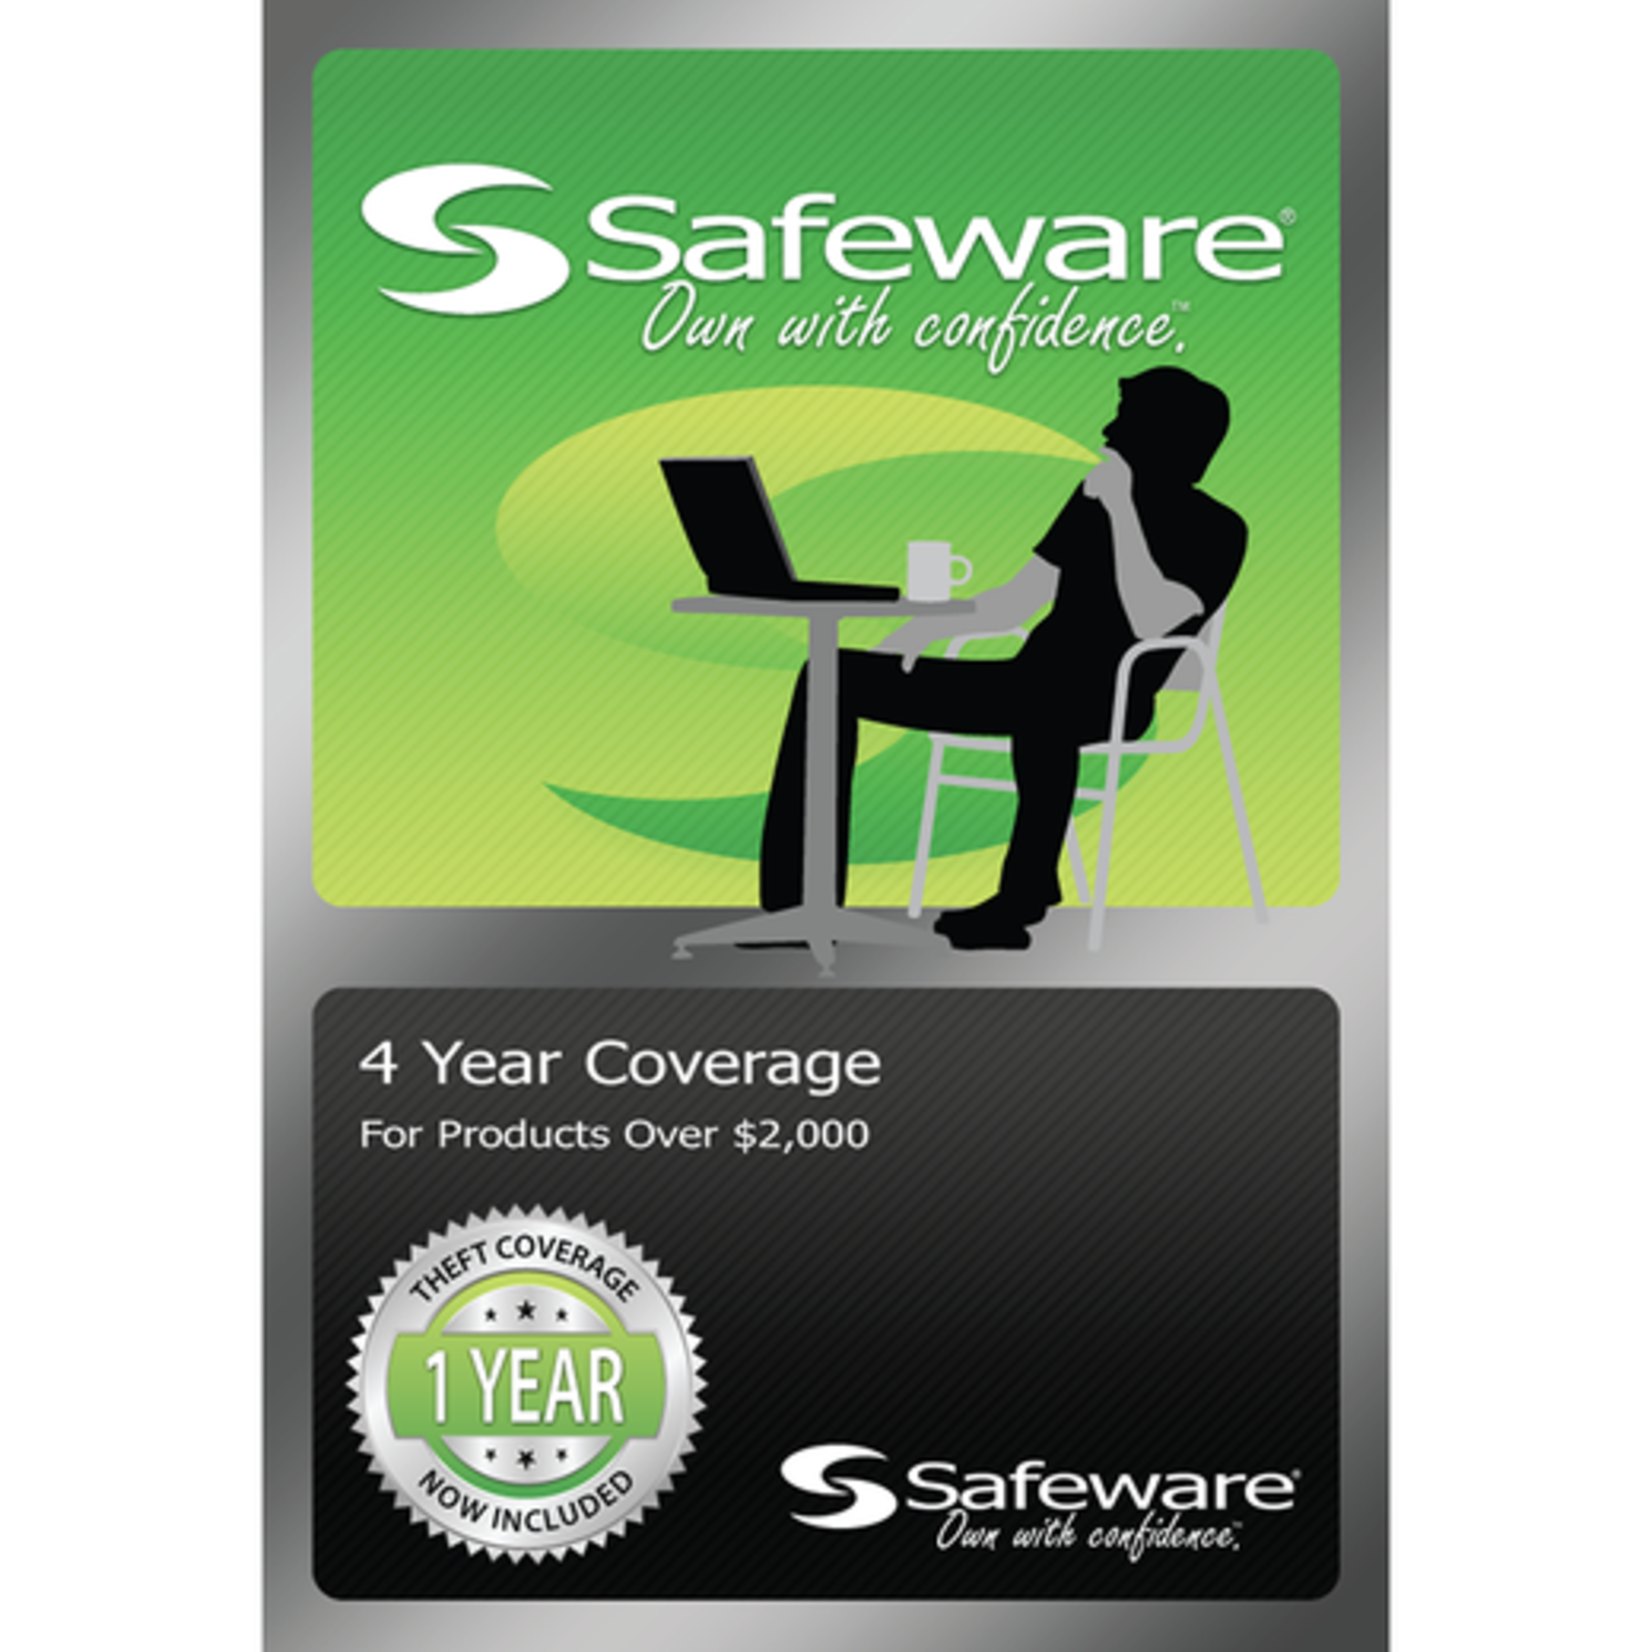 Safeware Safeware 4 Year Coverage for Products Over $2,000 Green Card Accidental Damage and theft coverage.